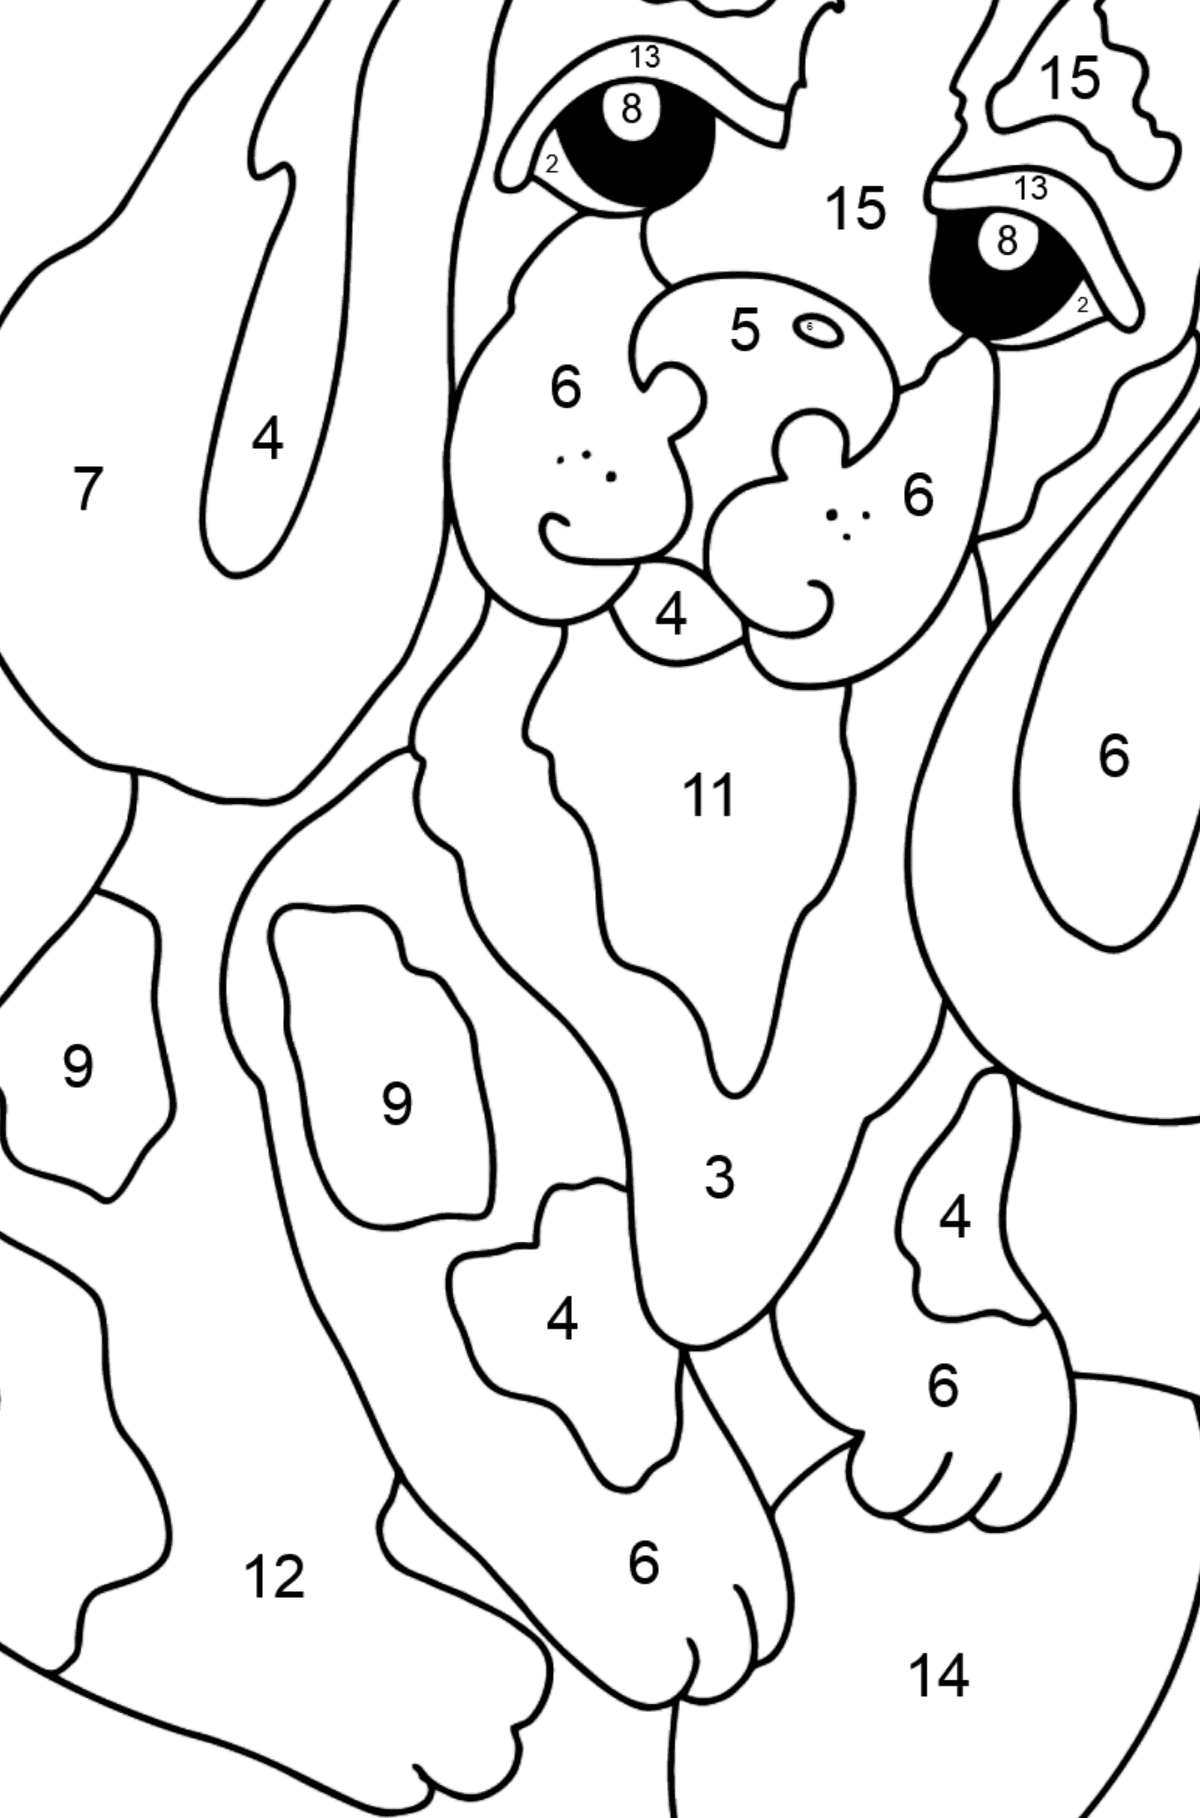 Coloring Page - A Dog is Playing with a Blue Ball  - Coloring by Numbers for Kids